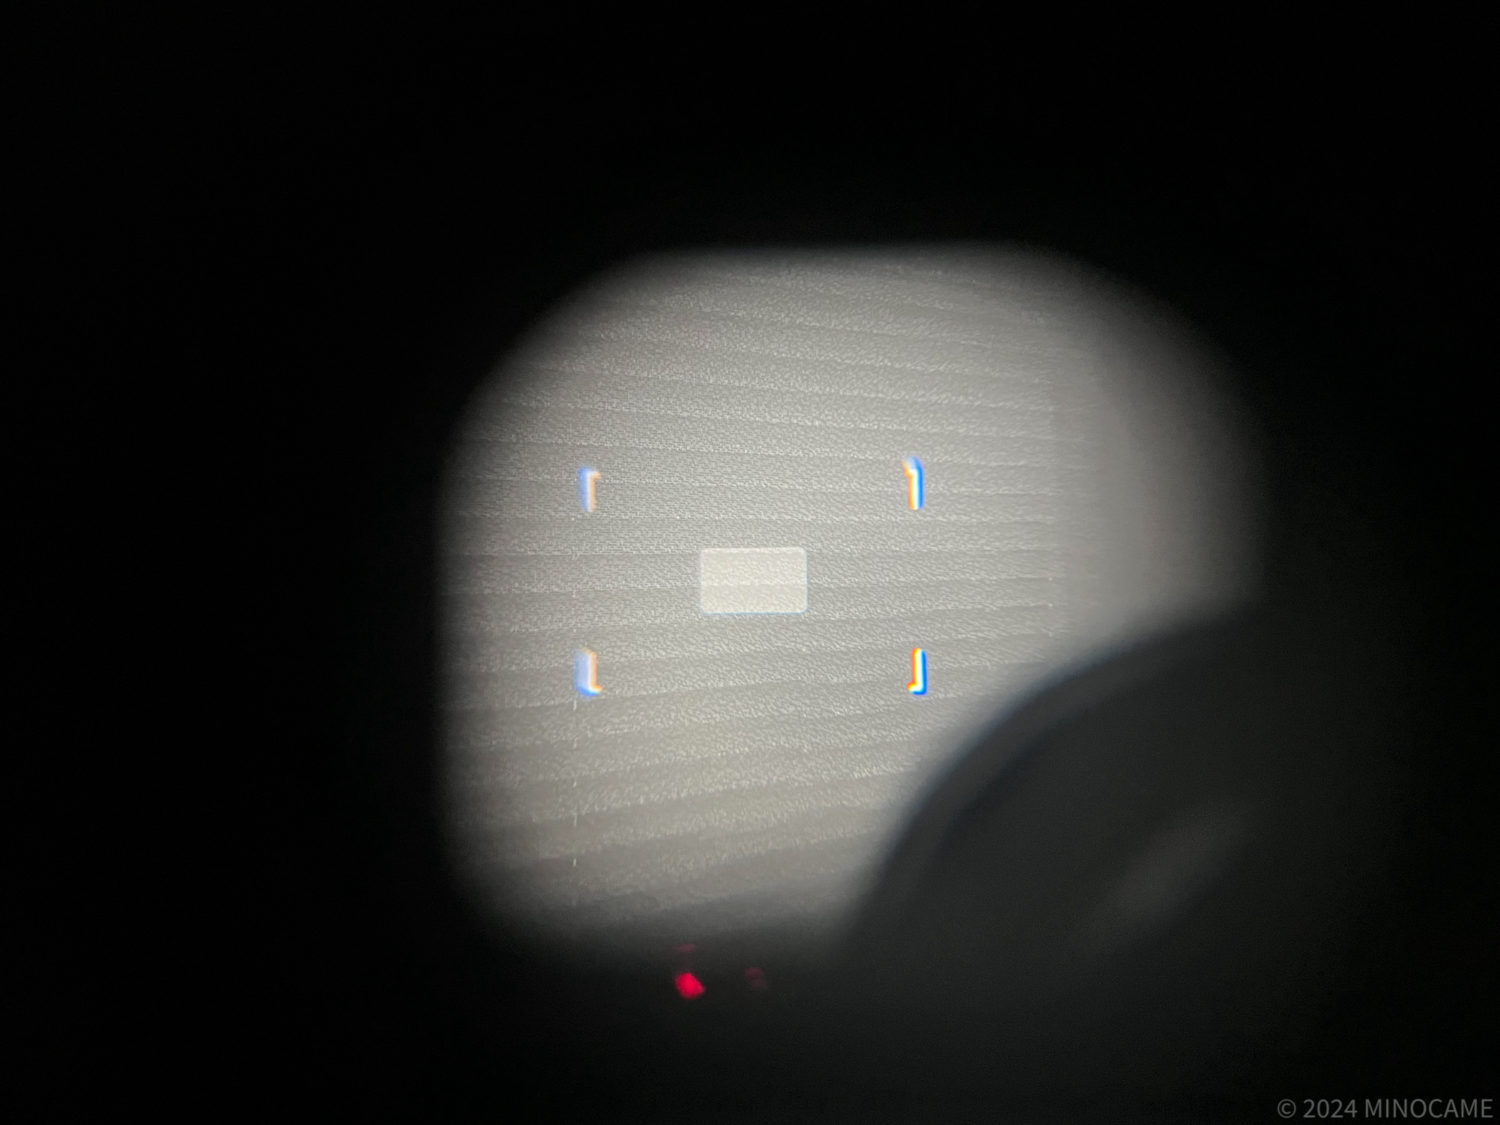 Situation of rangefinder with Magnifier 1.25x plus unknown magnifier